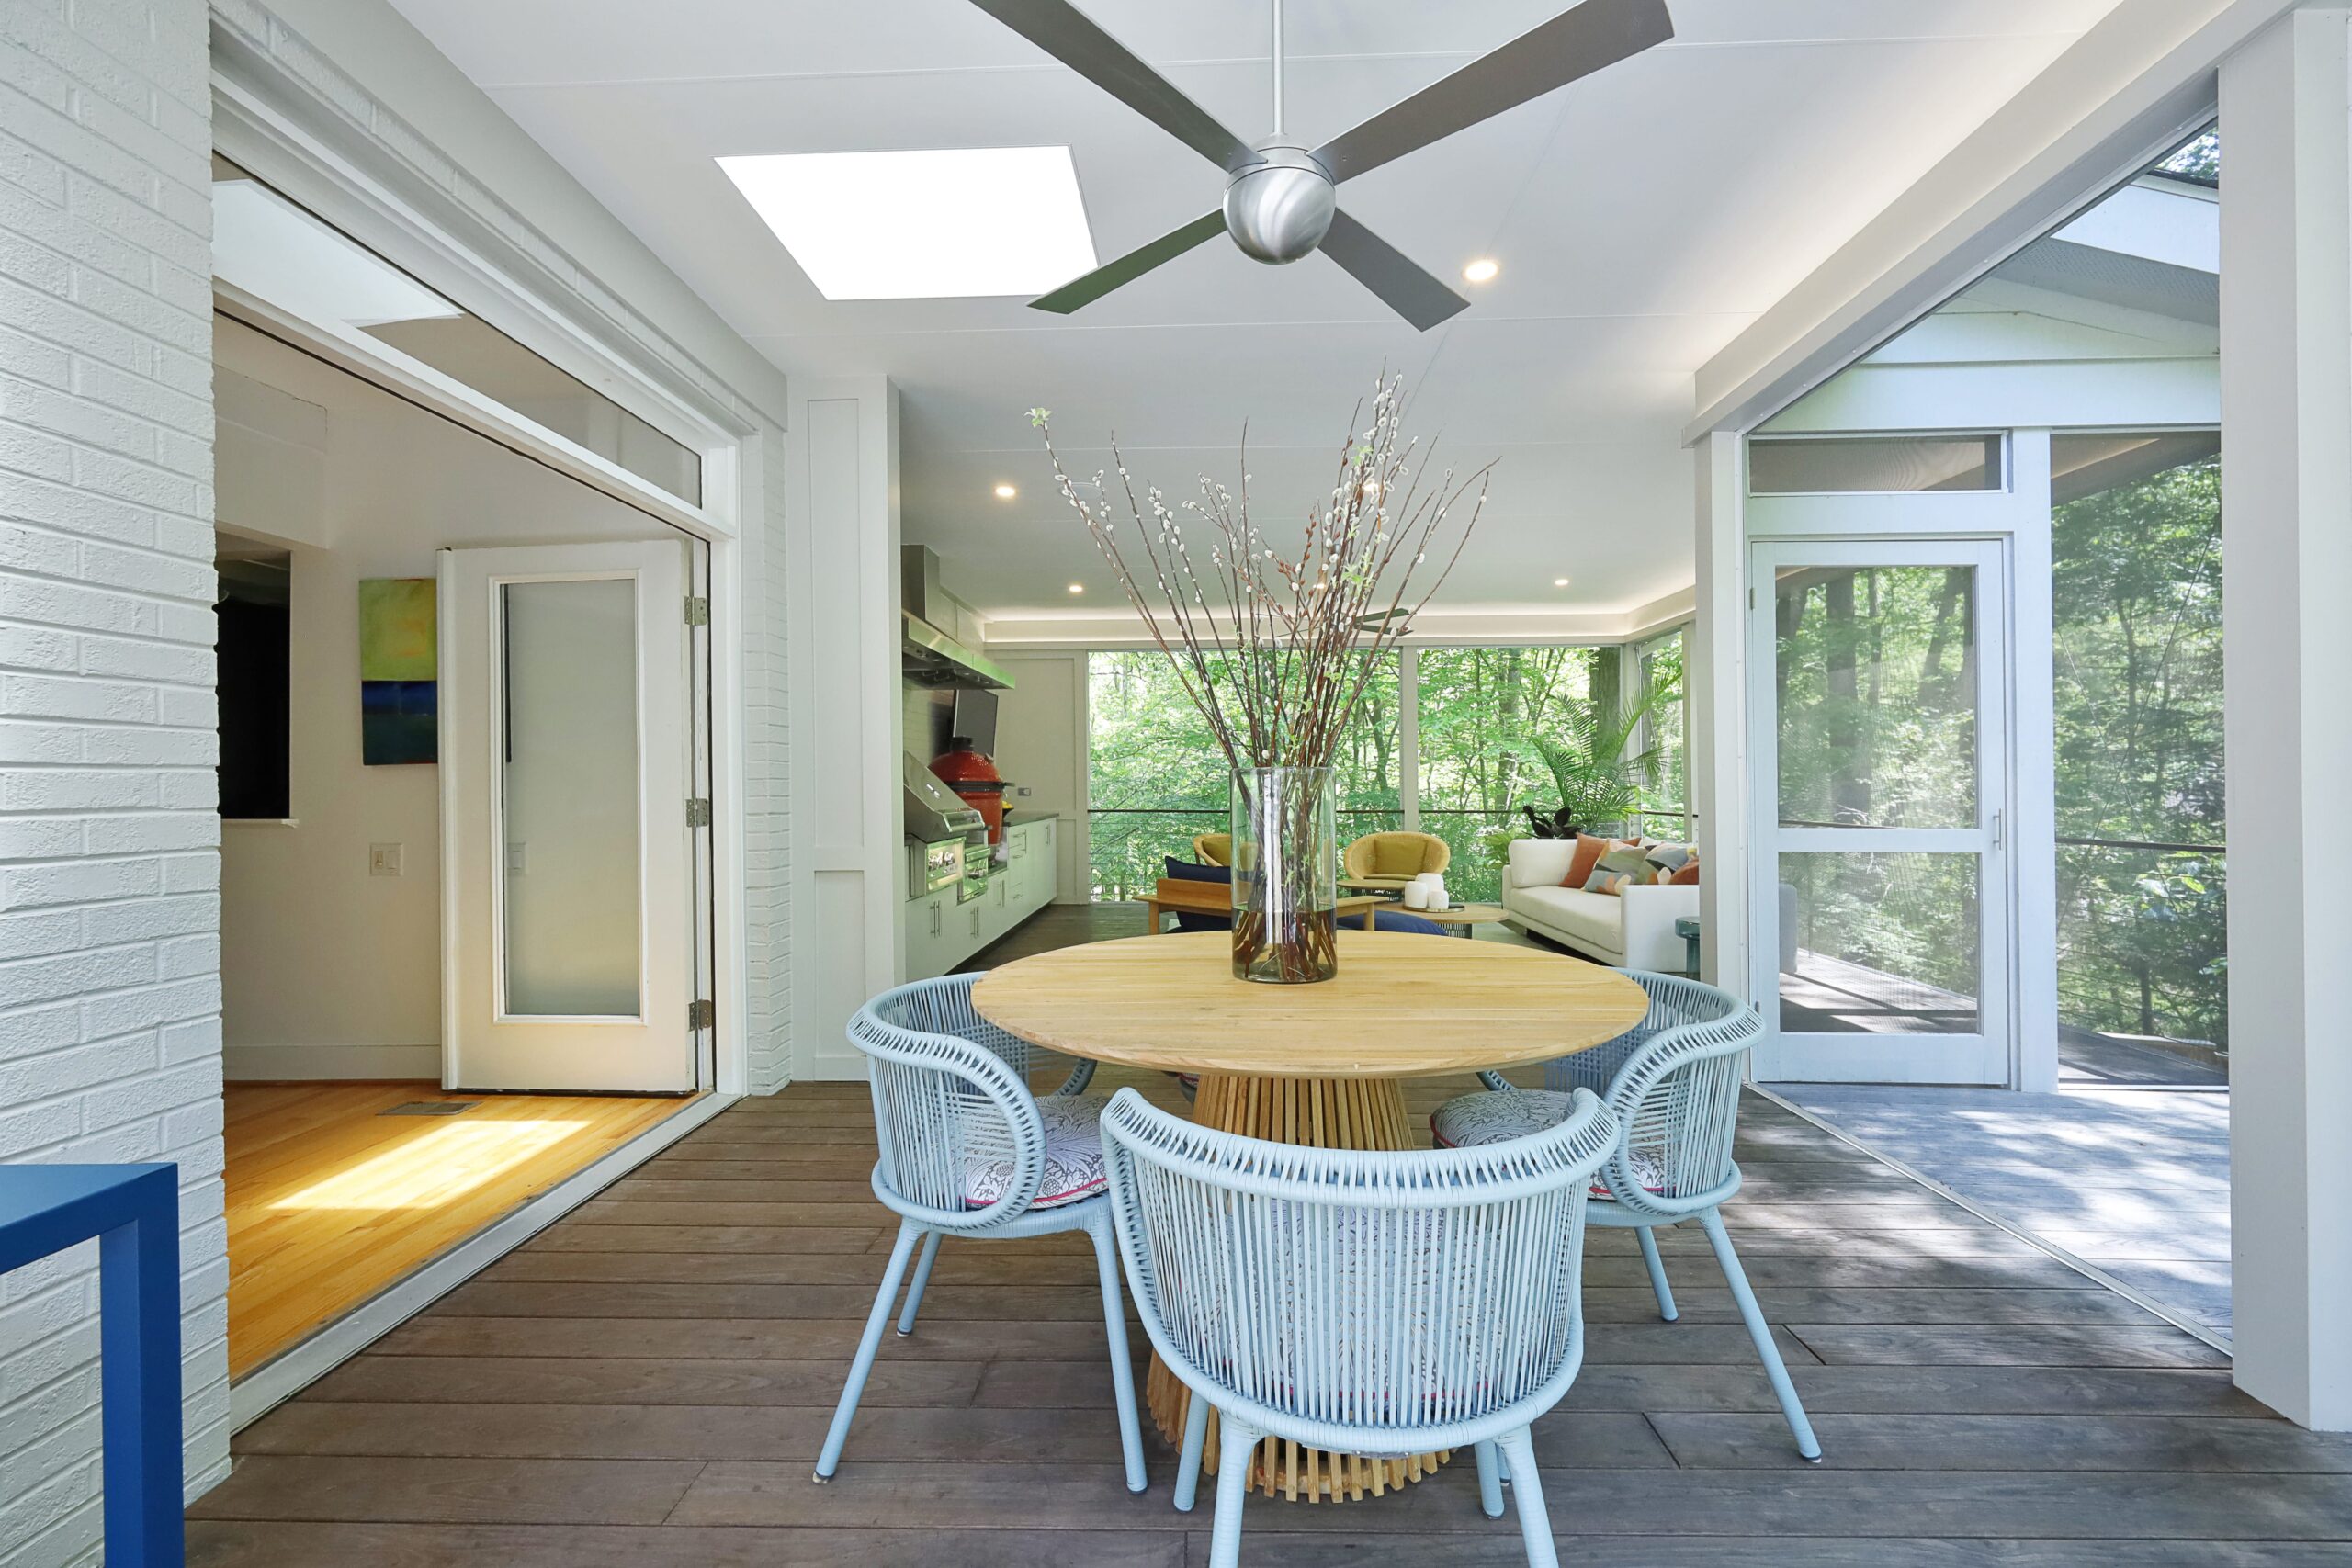 A contemporary dining table, located just outside the large French doors connecting to the main house, sits under large skylights in the screened porch.